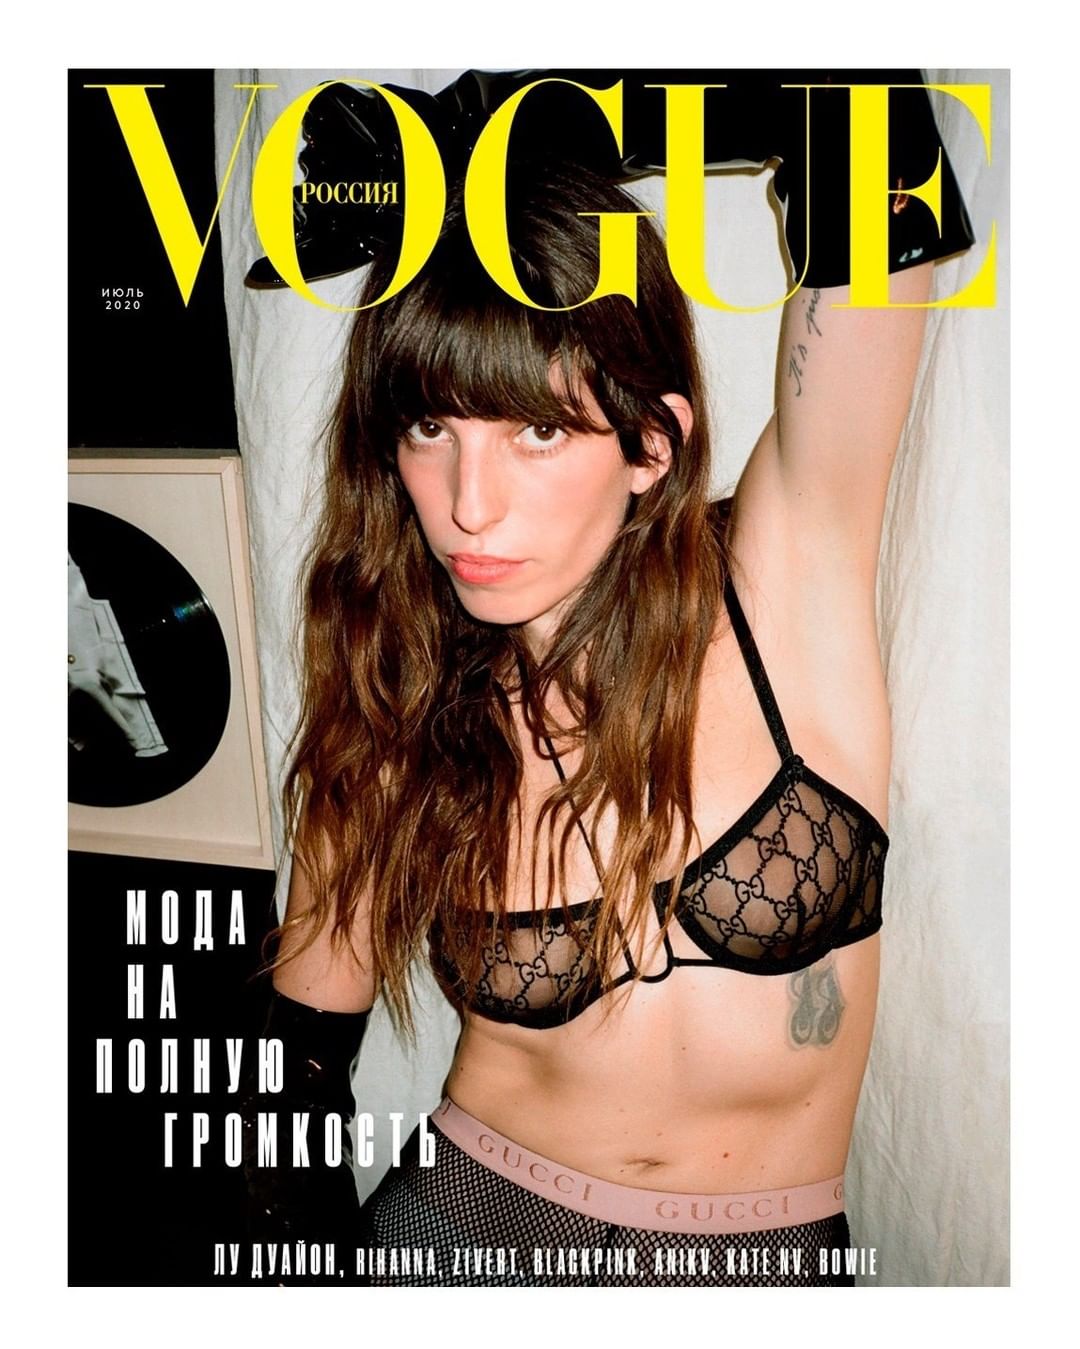 Gucci - On the cover of @voguerussia’s latest issue, @loudoillon is captured by @blackpierreange wearing an embroidered GG tulle lingerie set with matching leggings from #GucciPreFall20 by @alessandro...